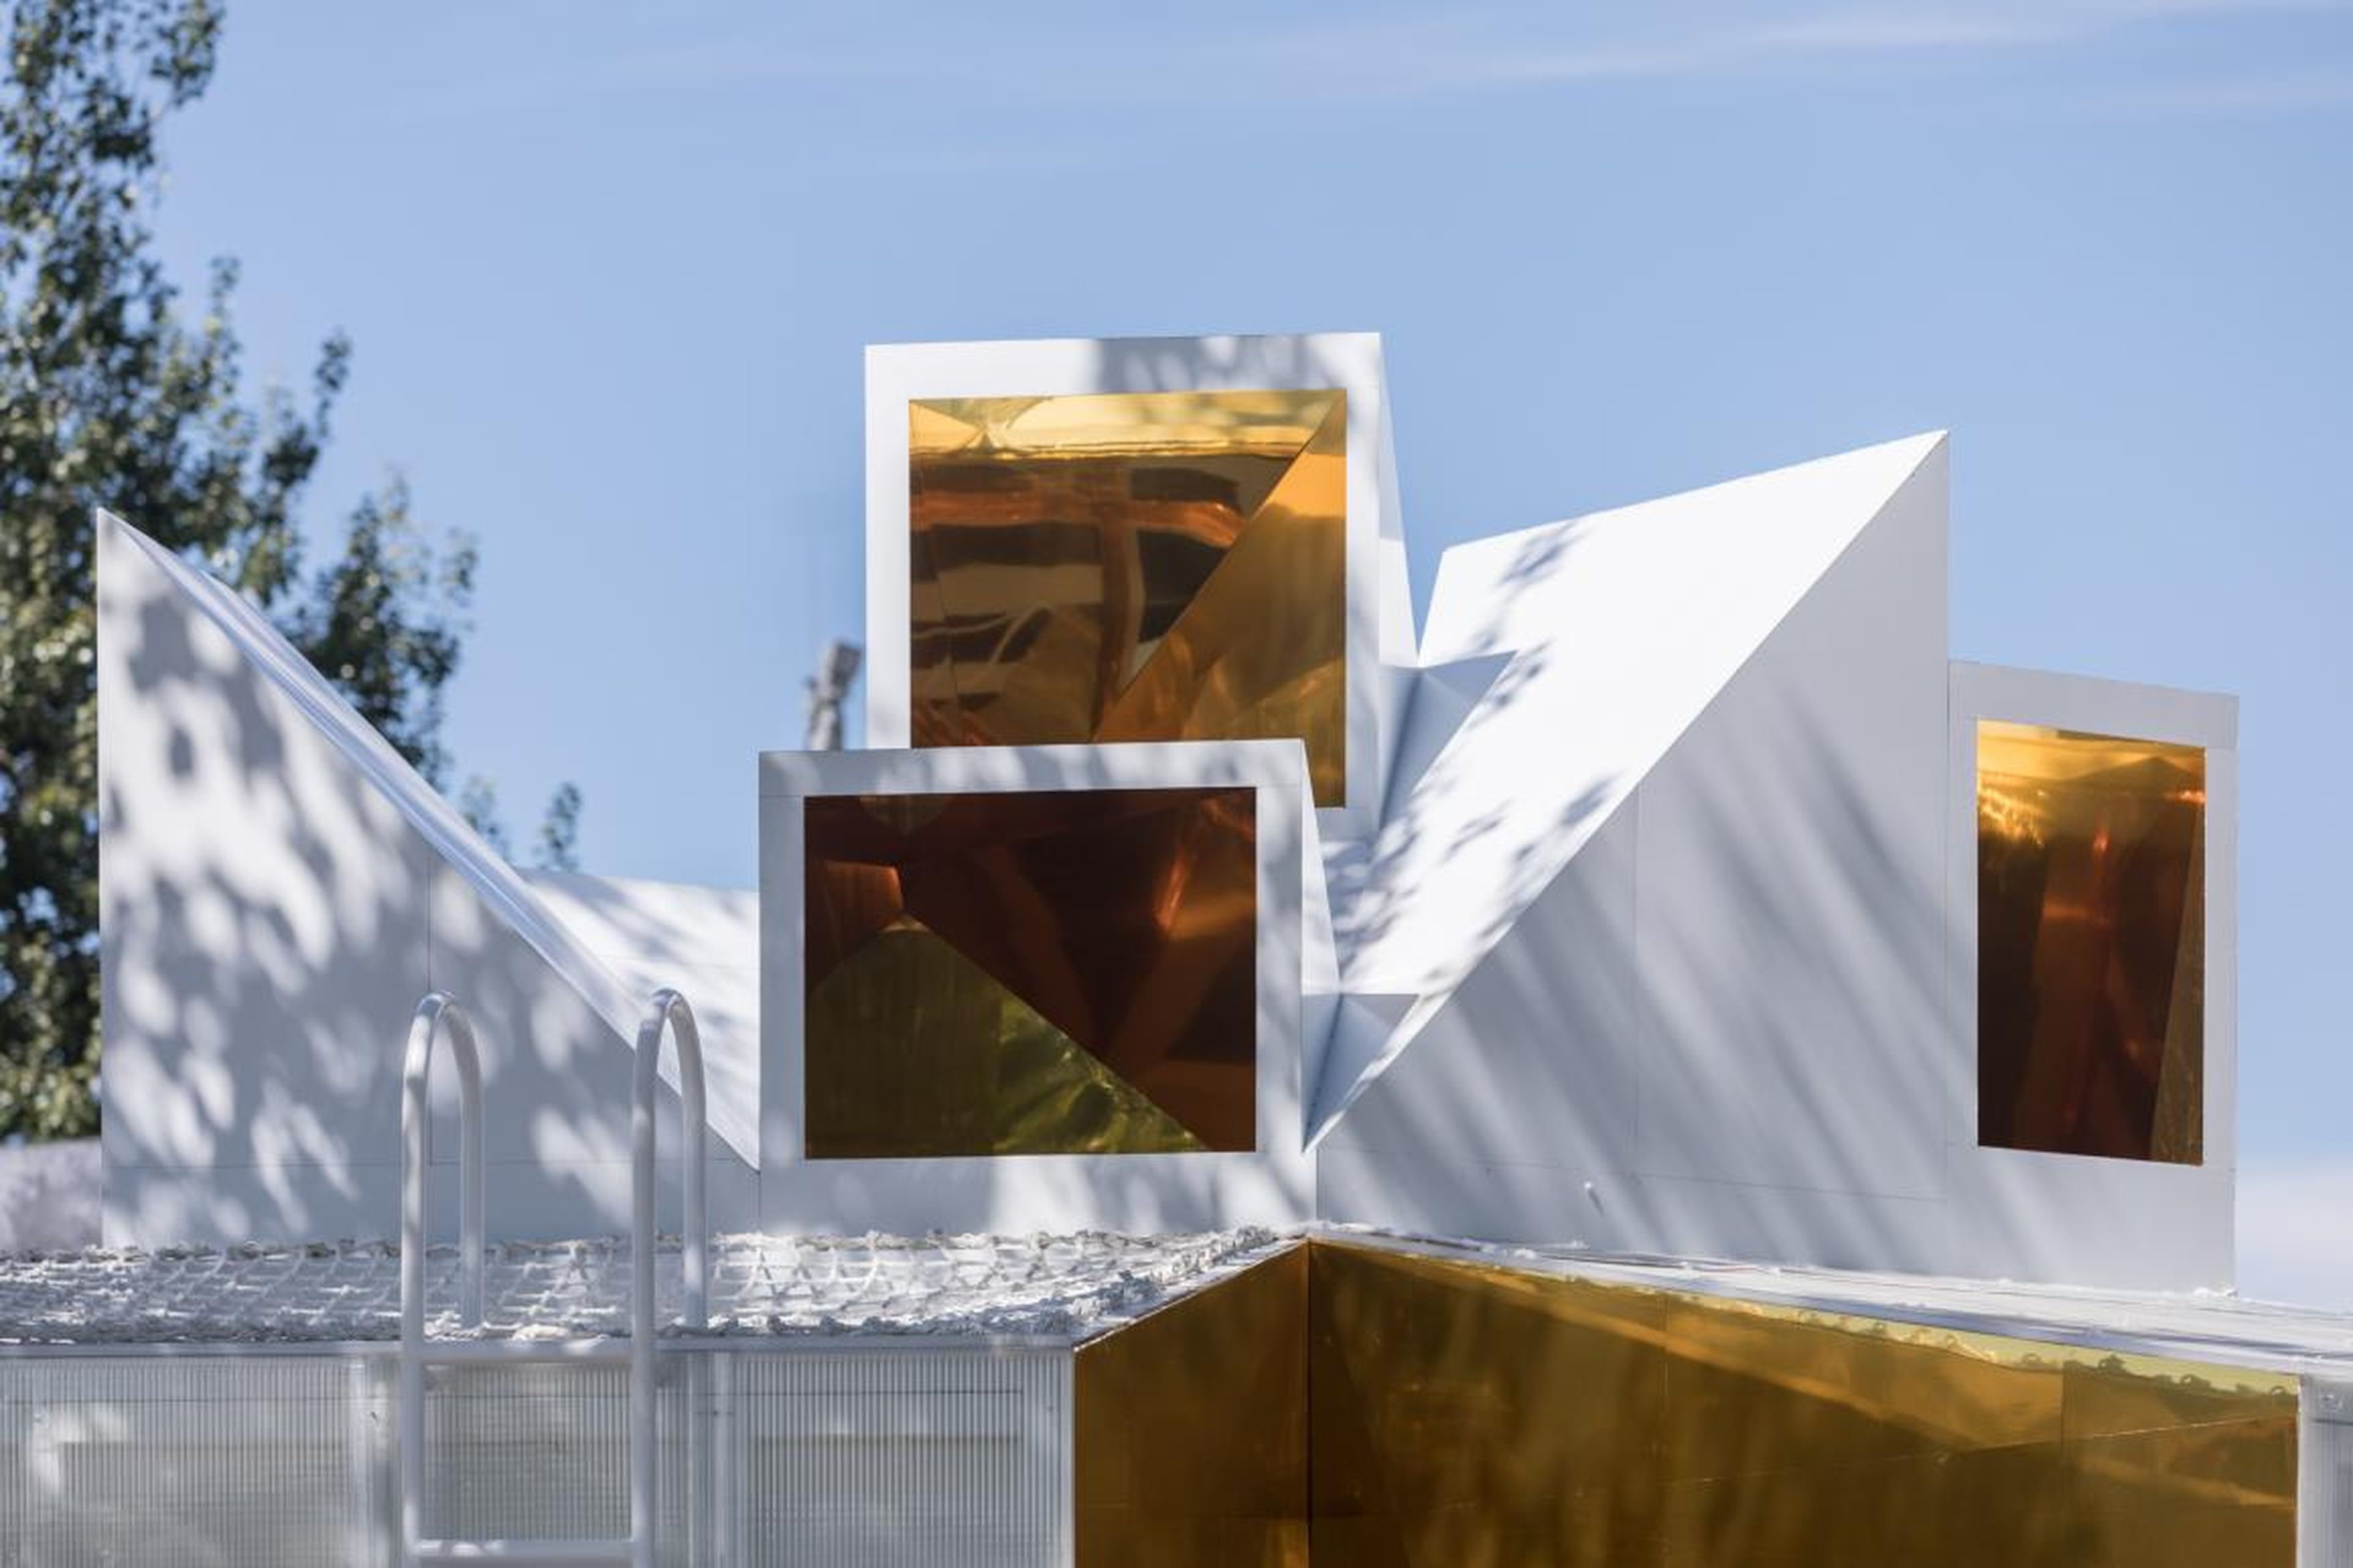 Golden mirrors on the cabin's exterior reflect its urban surroundings.